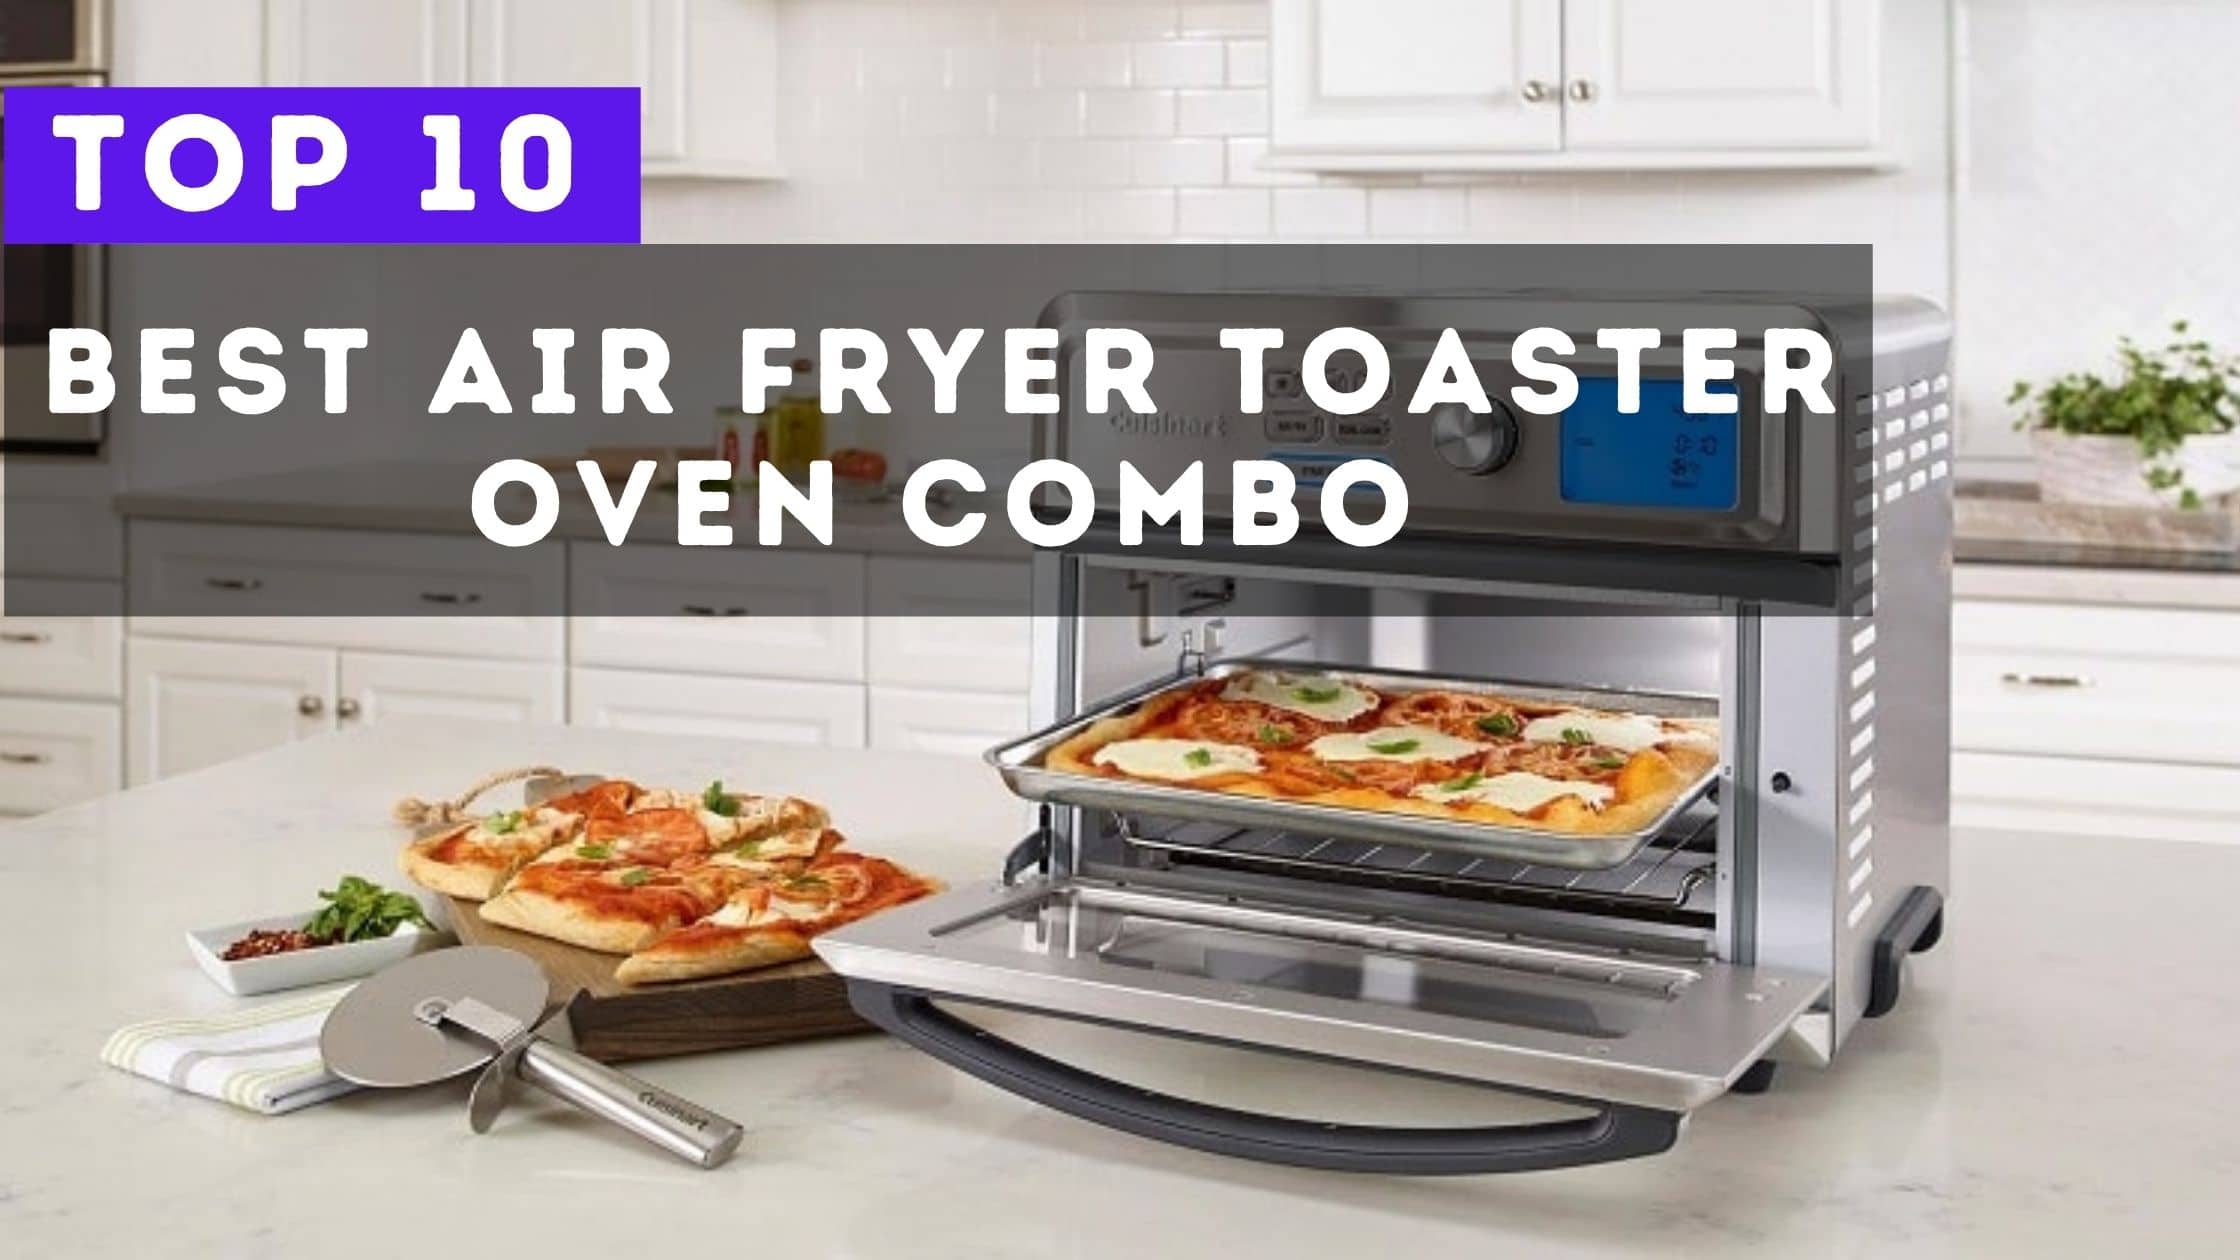 10 Best Air Fryer Toaster Oven Combo Detailed Reviews 2022